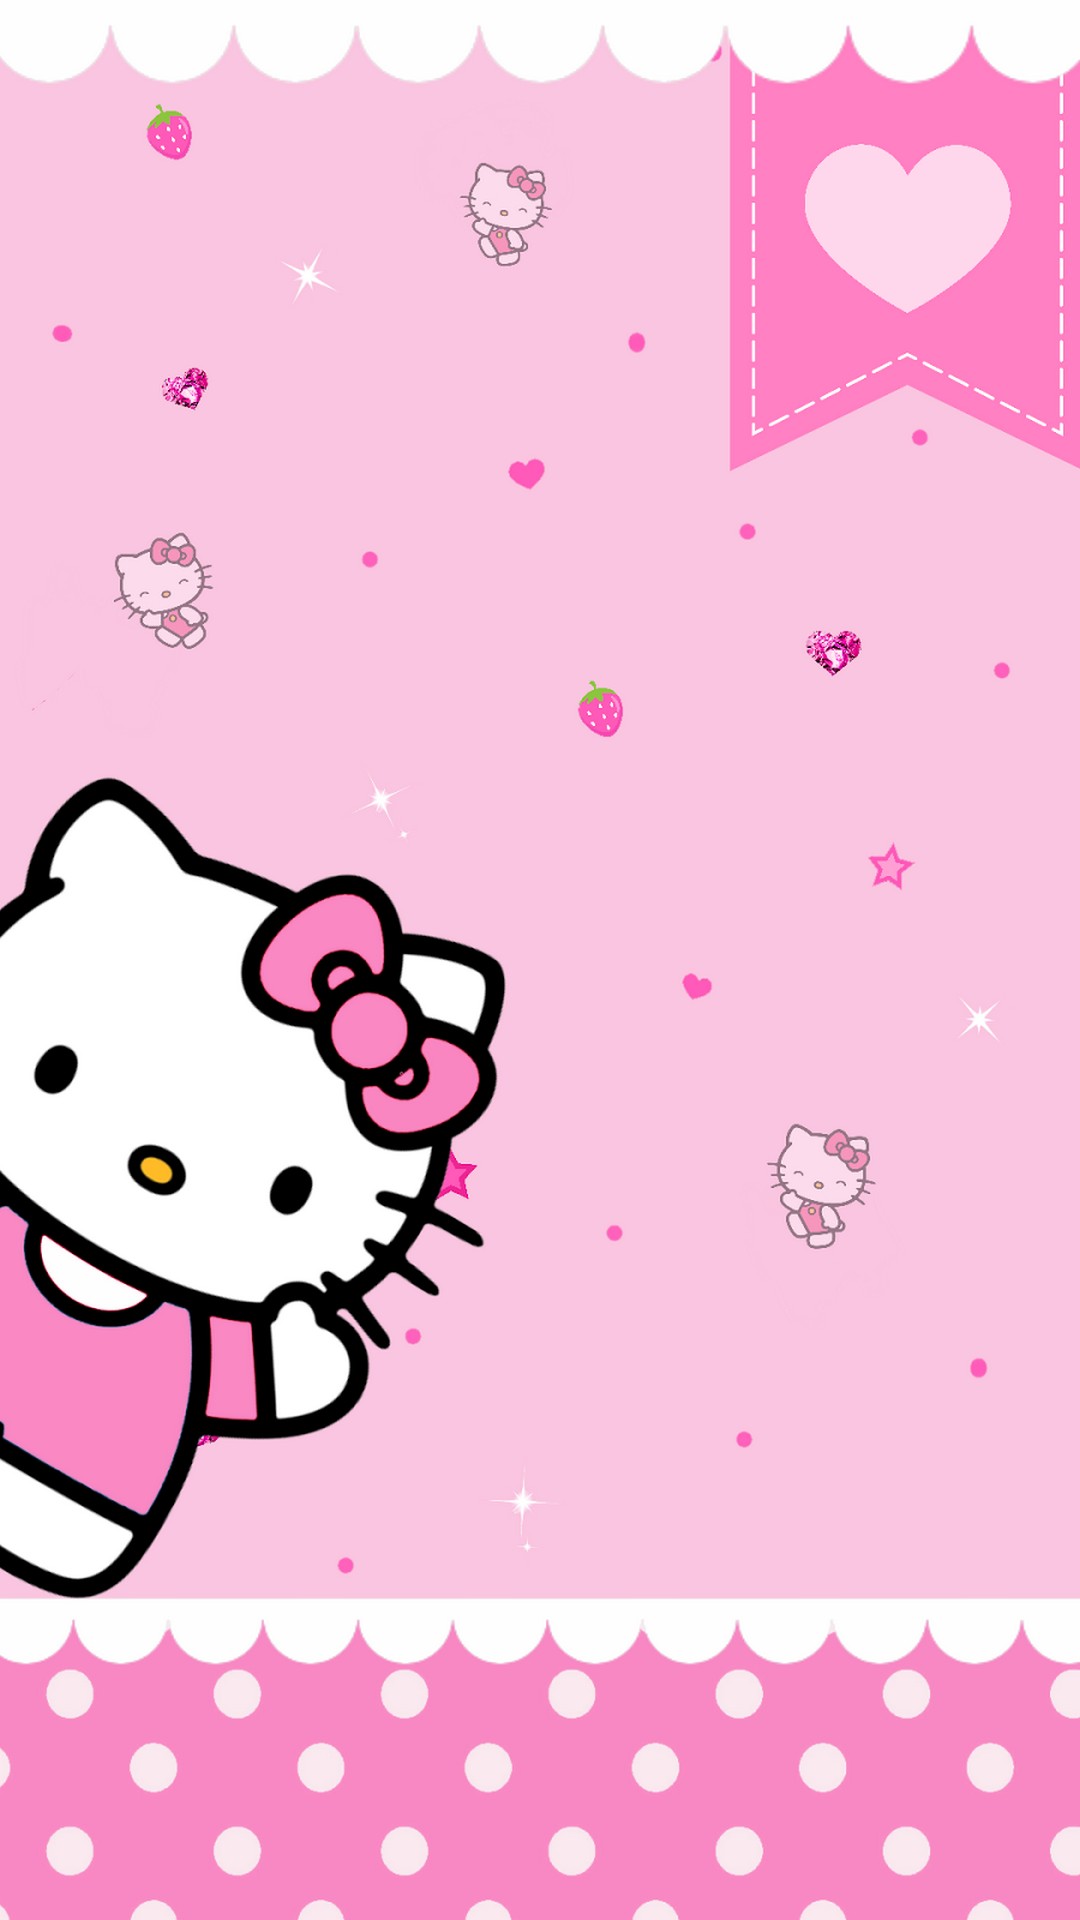 Hello Kitty Pictures HD Wallpaper For iPhone with resolution 1080X1920 pixel. You can use this wallpaper as background for your desktop Computer Screensavers, Android or iPhone smartphones